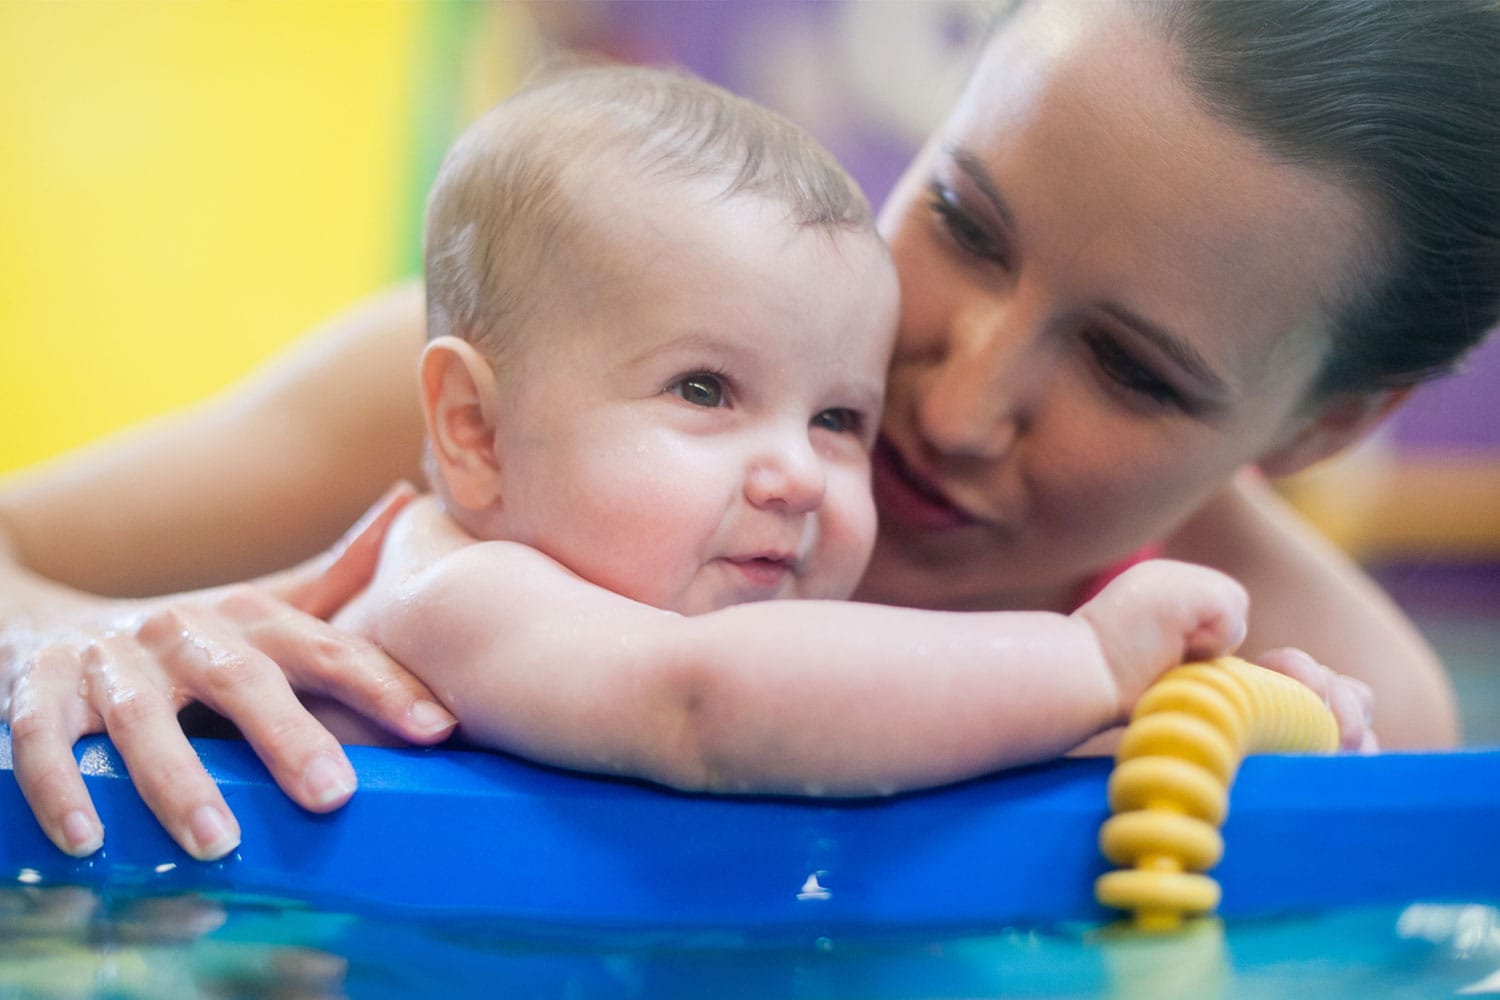 A mother talks to a baby as they hold on to a floaty in the pool